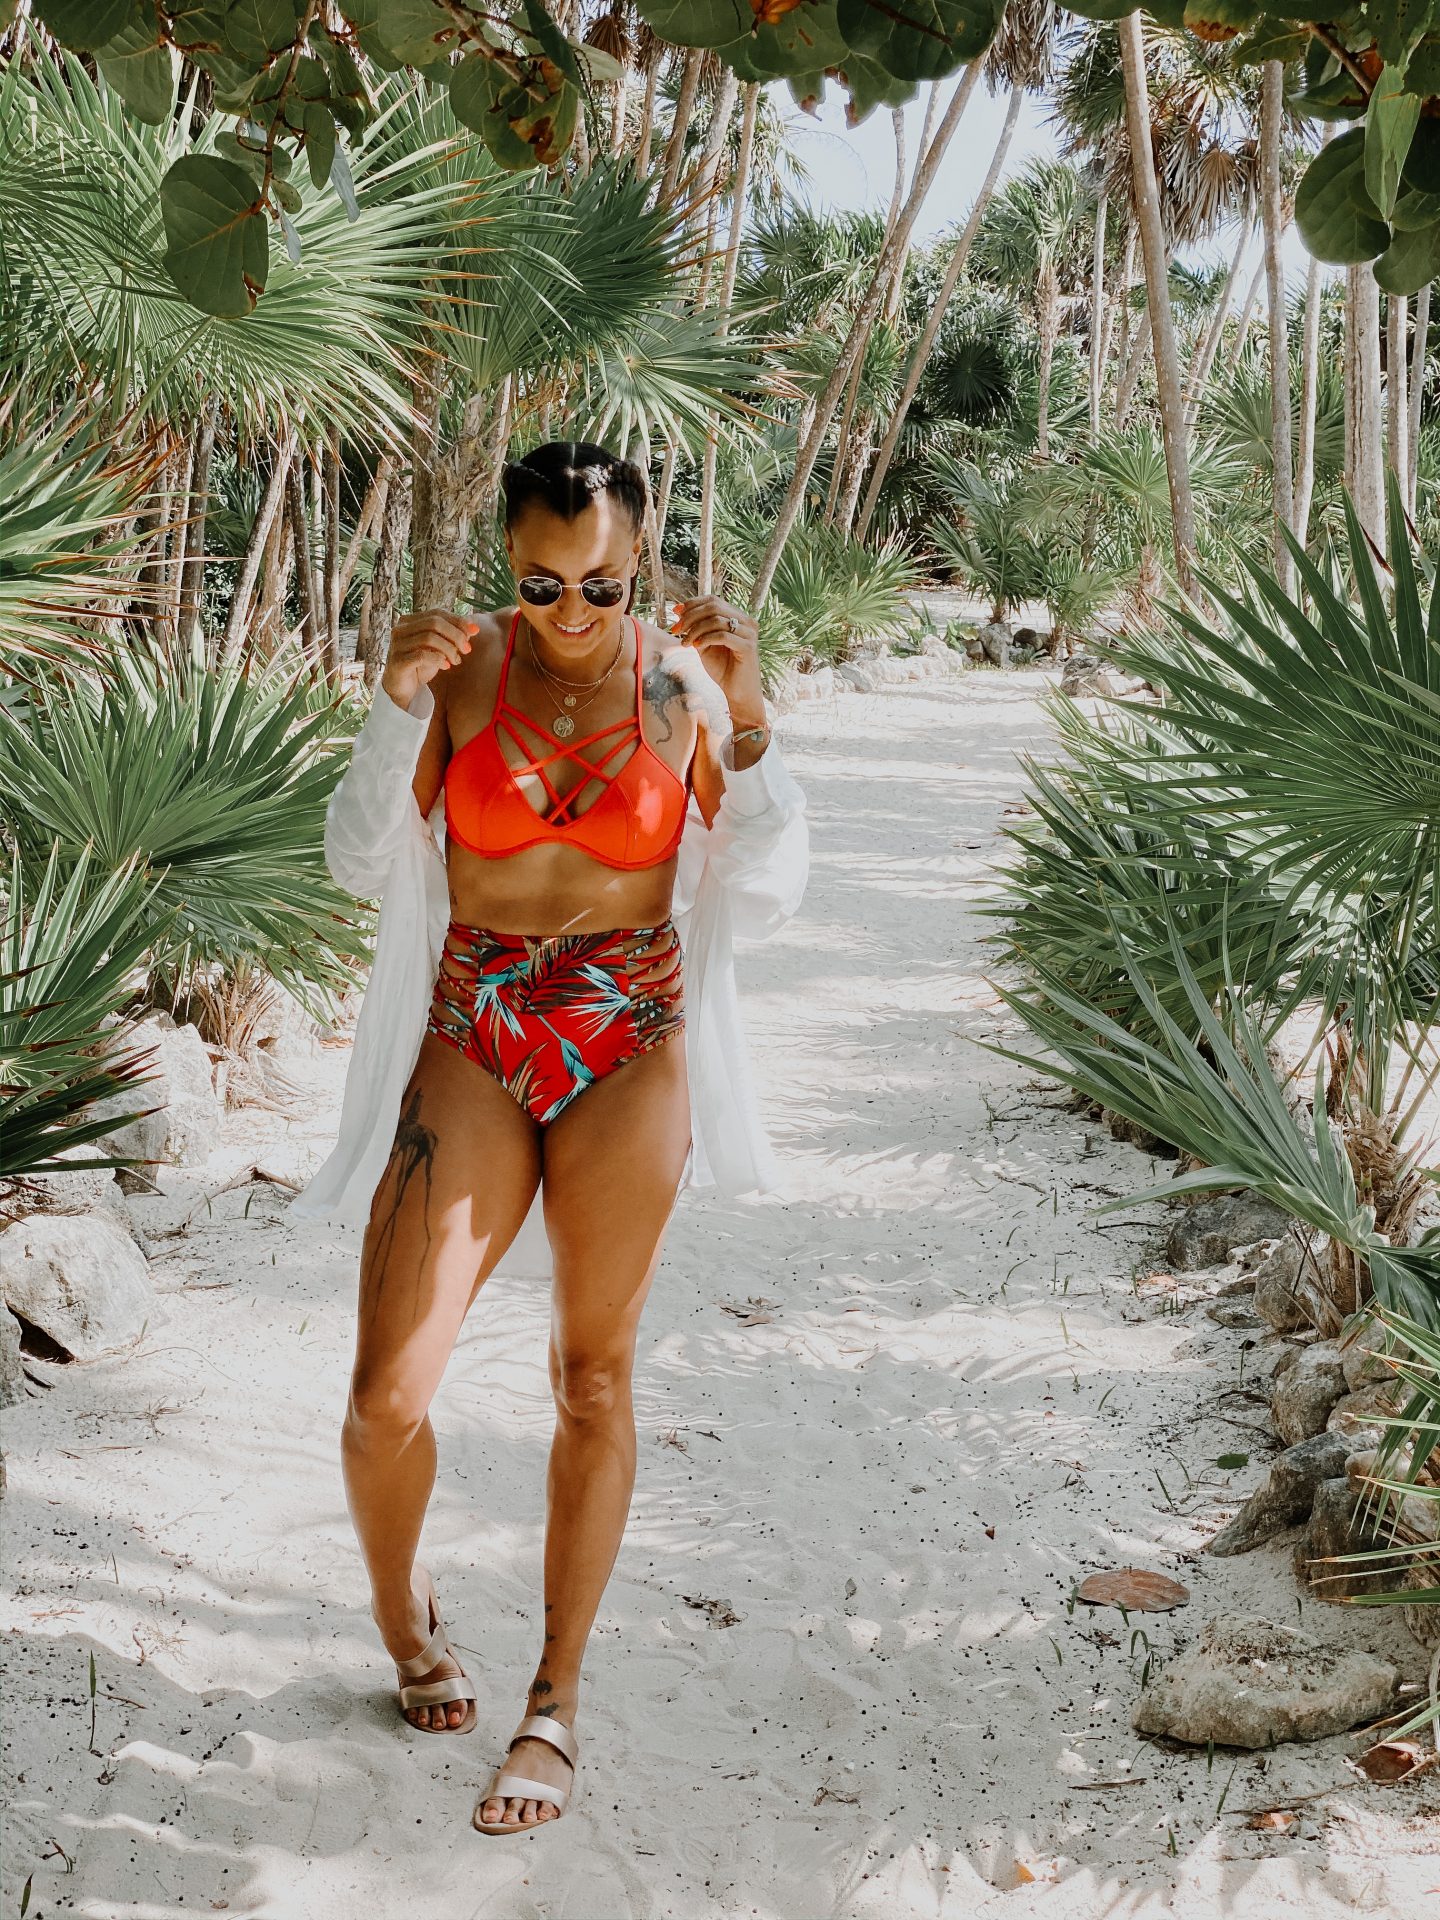 image of a mixed race woman, standing on a sandy path surrounded by palm trees and greenery. She is wearing a bright red, patterned two-piece swimsuit.